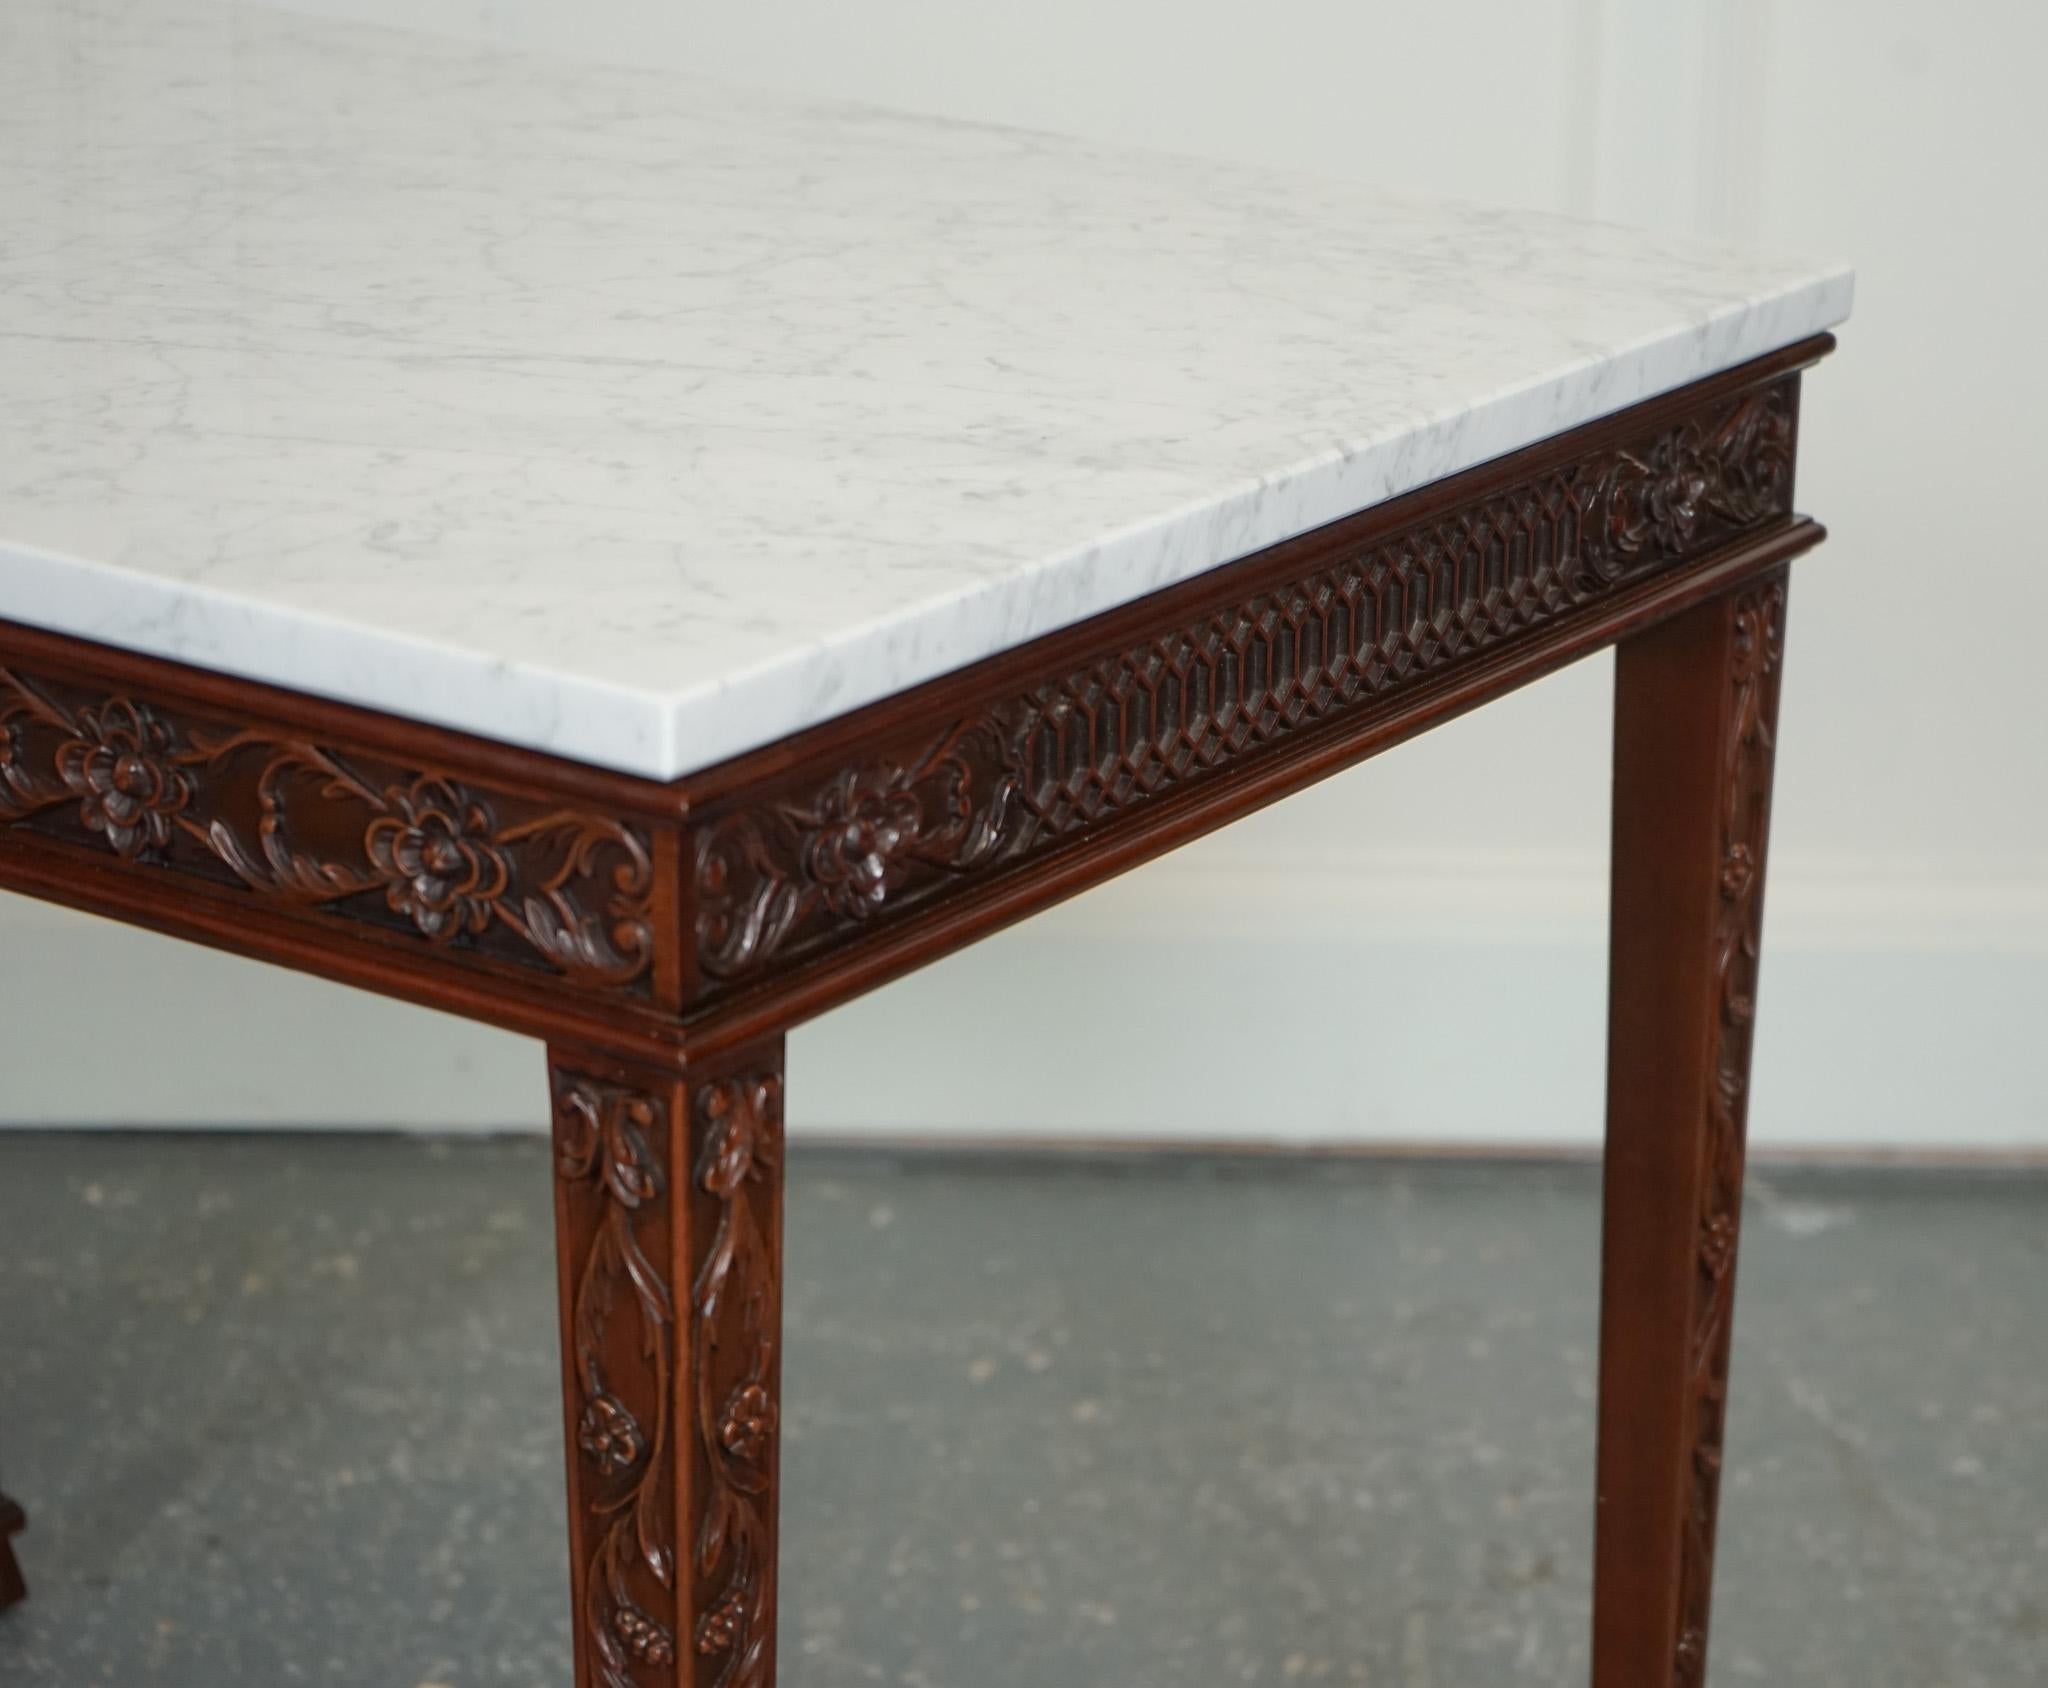 PAiR OF CHIPPENDALE  Style CONSOLE TabLES MIT NEW WHITE CARRARA MARBLE TOPS (Chippendale) im Angebot